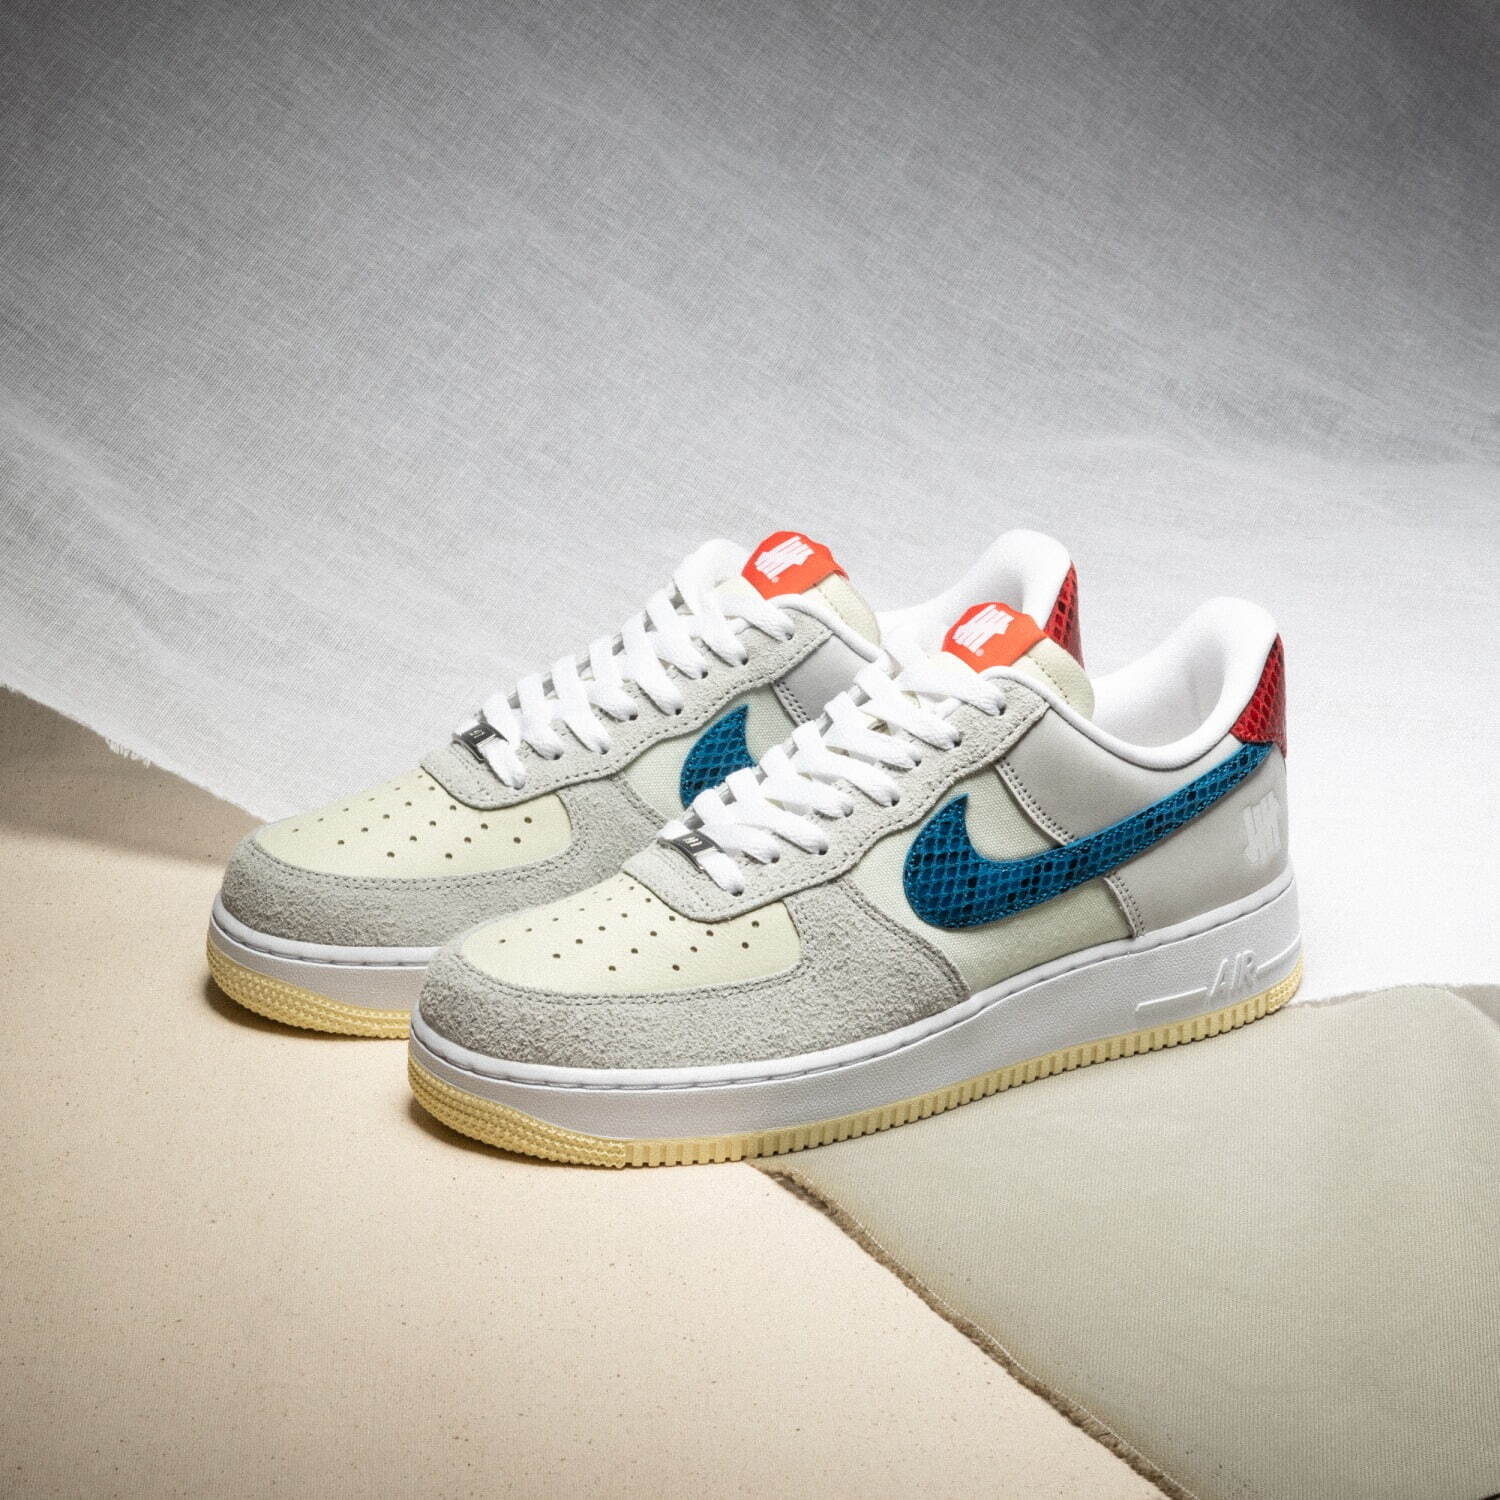 NIKE AF1 × UNDEFEATED ナイキ エアフォースワン